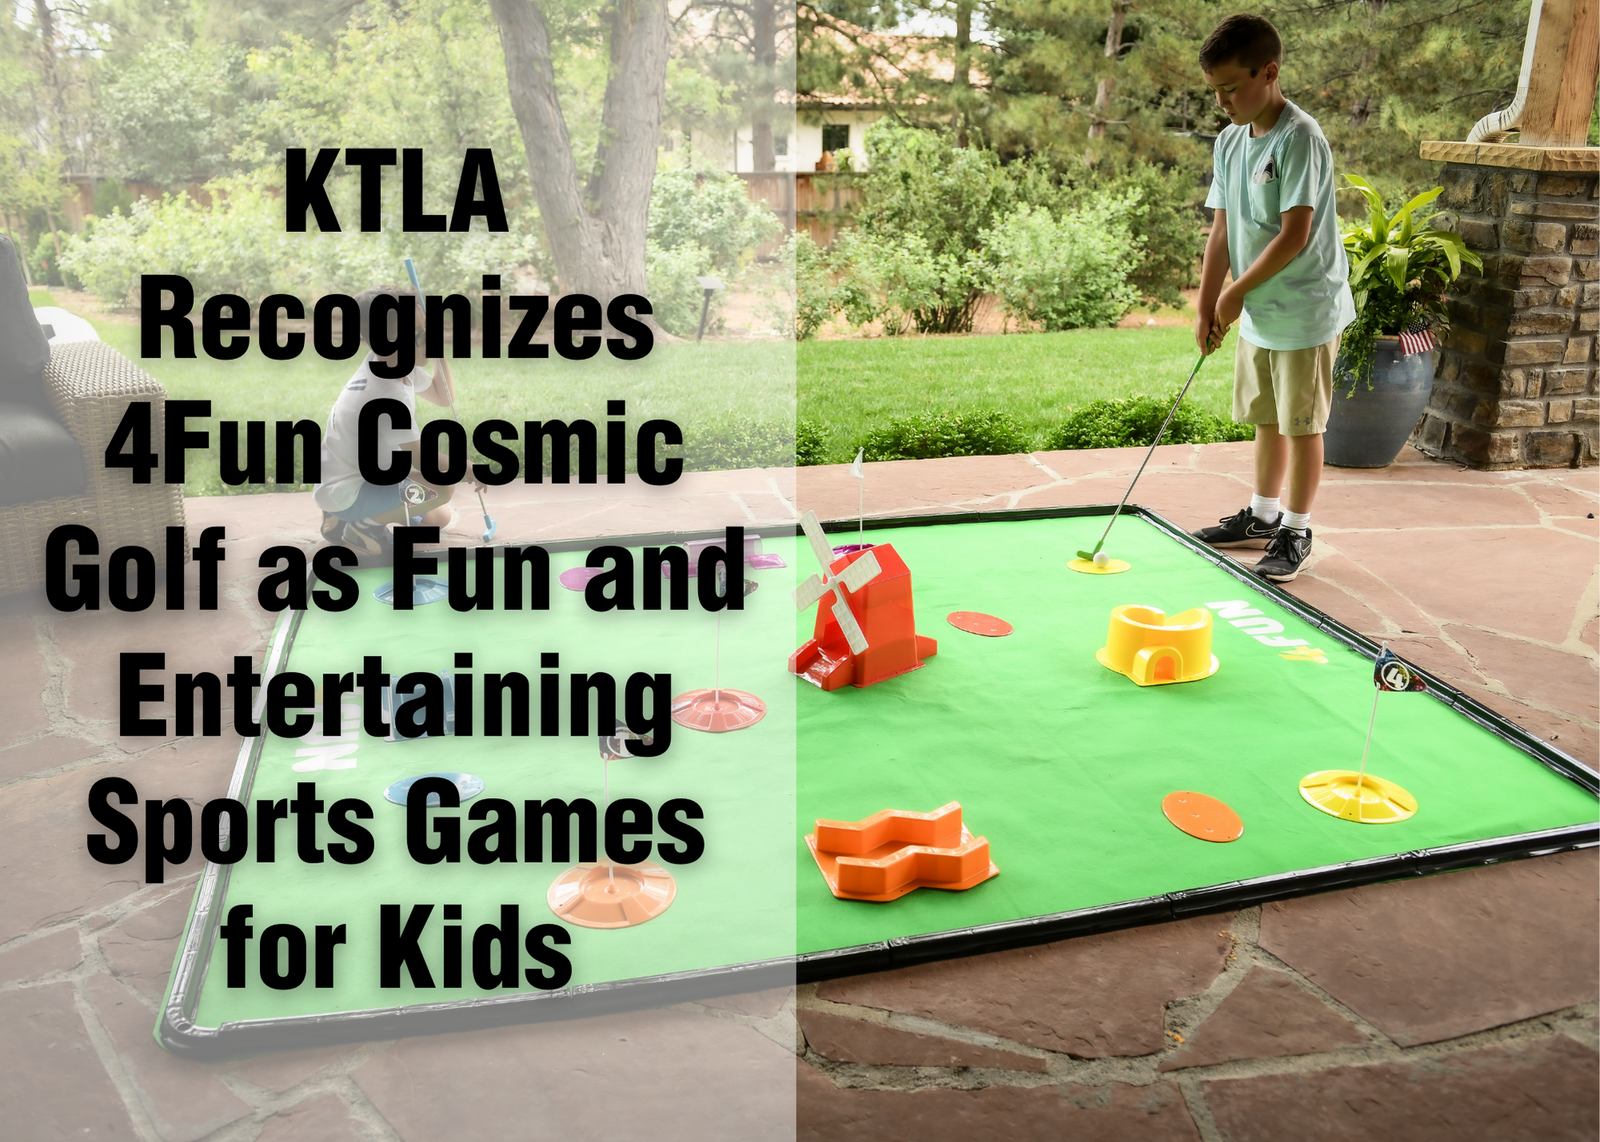 Cosmic Golf Listed as Fun & Entertaining Sports Toys for Kids by KTLA